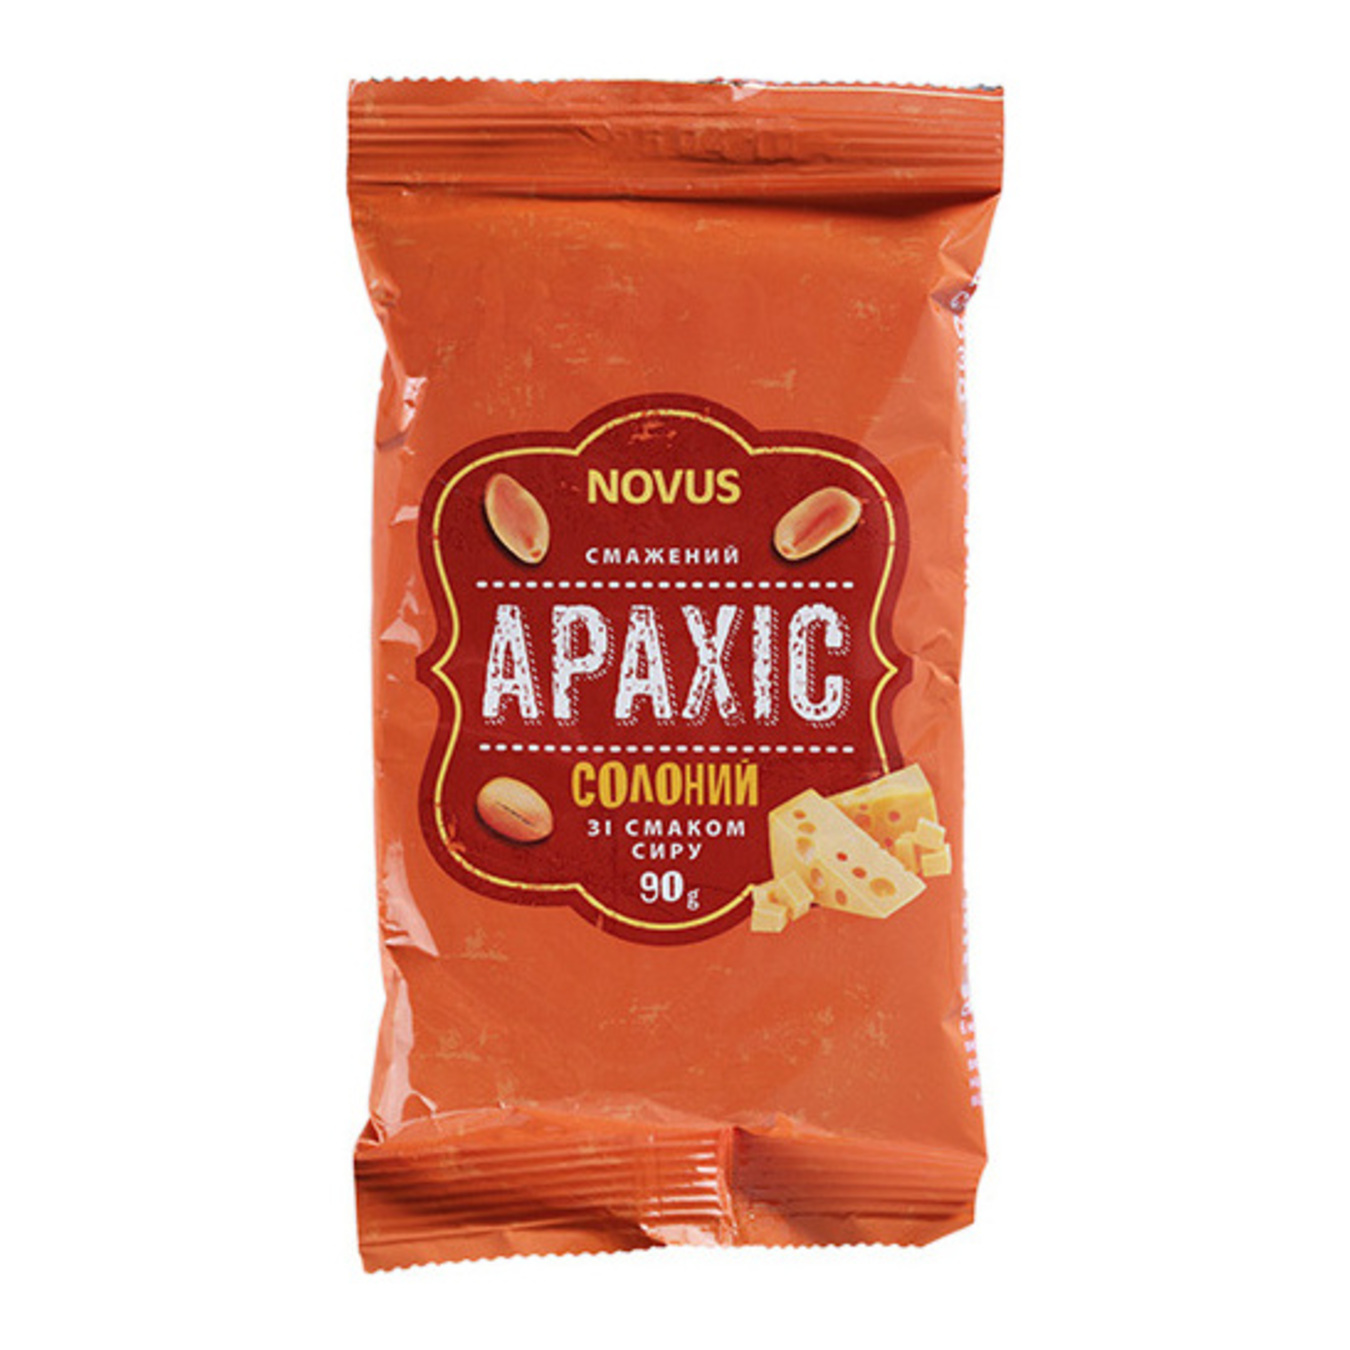 Peanuts Novus Fried Salted With Cheese Flavor 90g